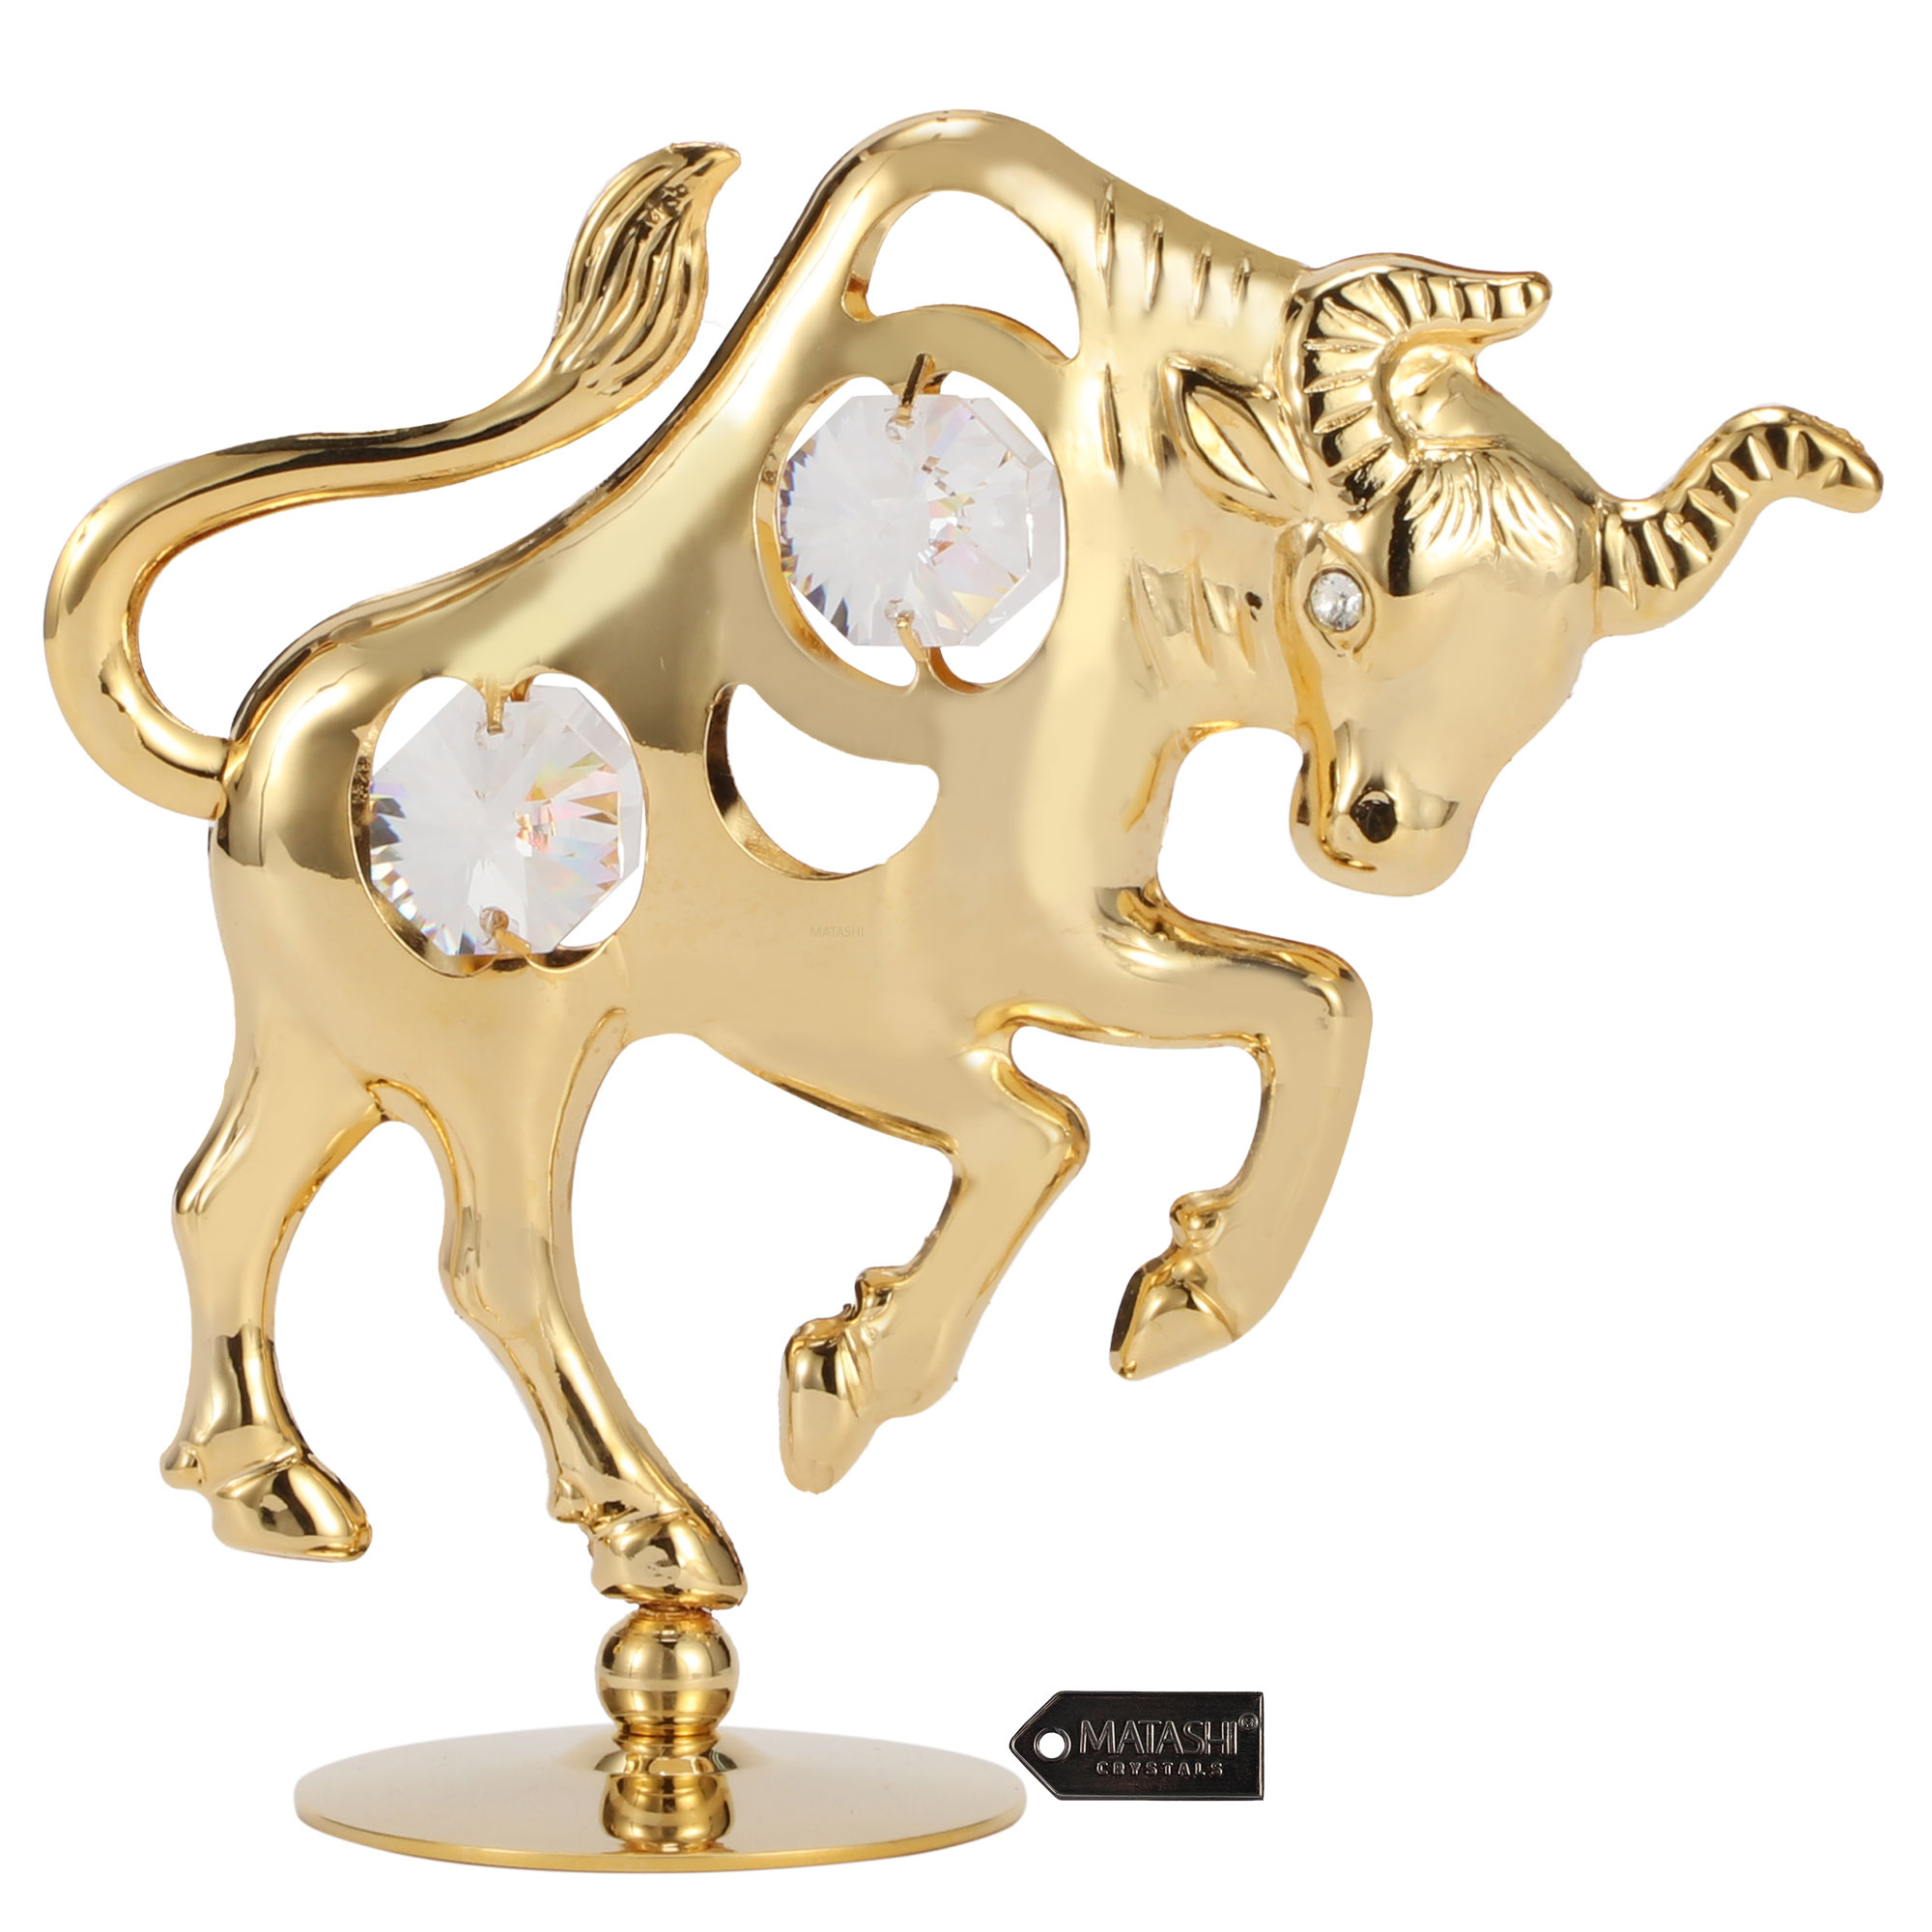 Matashi 24K Gold Plated Crystal Studded Ox/Bull Figurine Ornament ,Home Decoration Collectible Ornament Gift, Ox Wealth Statue Figurine